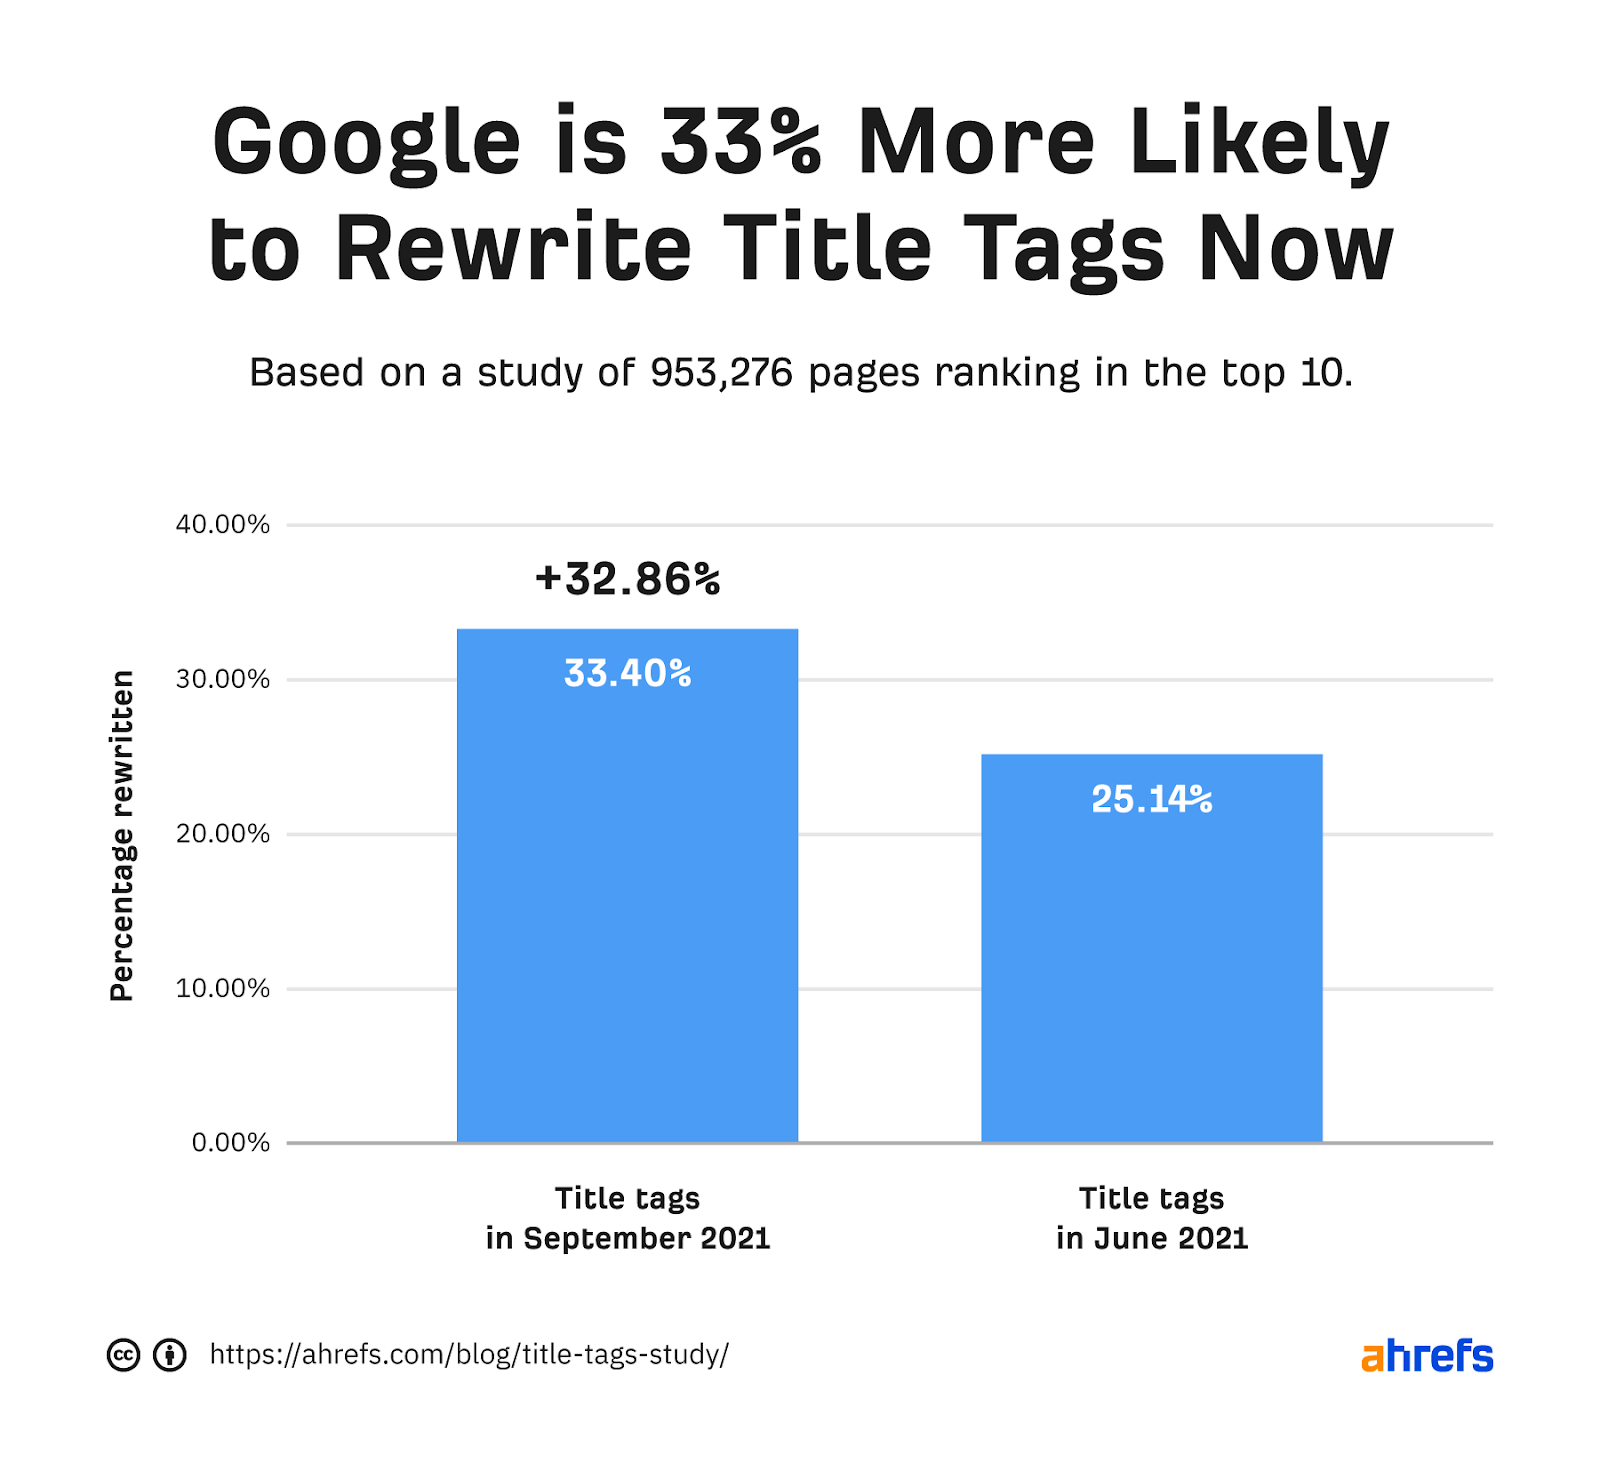 Bar chart showing Google is 33% more likely to rewrite title tags now